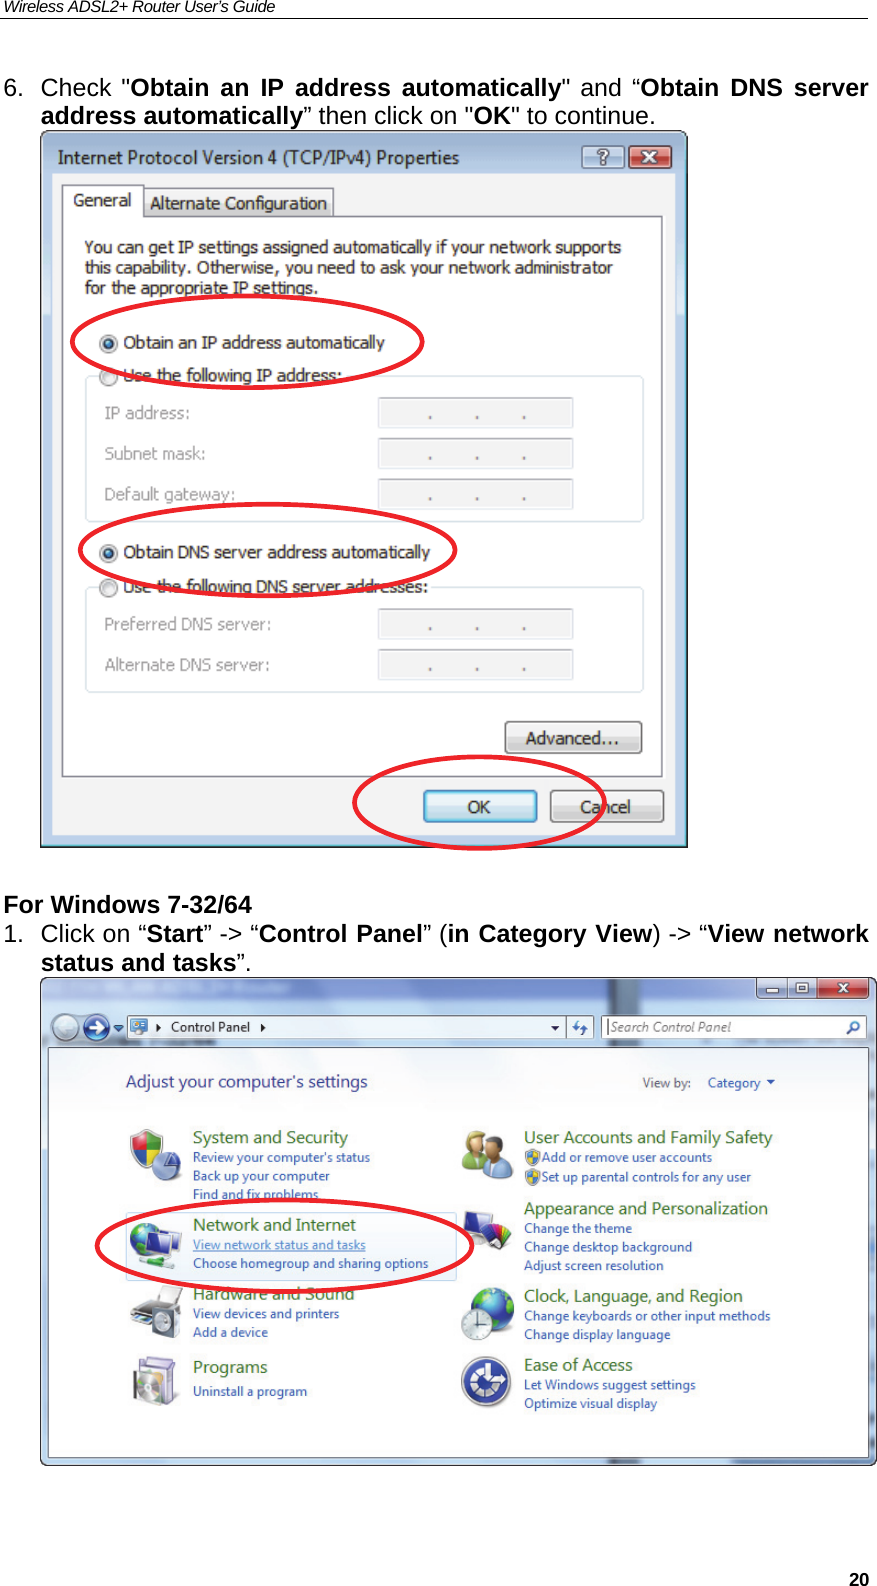 Wireless ADSL2+ Router User’s Guide     206. Check &quot;Obtain an IP address automatically&quot; and “Obtain DNS server address automatically” then click on &quot;OK&quot; to continue.   For Windows 7-32/64 1.  Click on “Start” -&gt; “Control Panel” (in Category View) -&gt; “View network status and tasks”.   